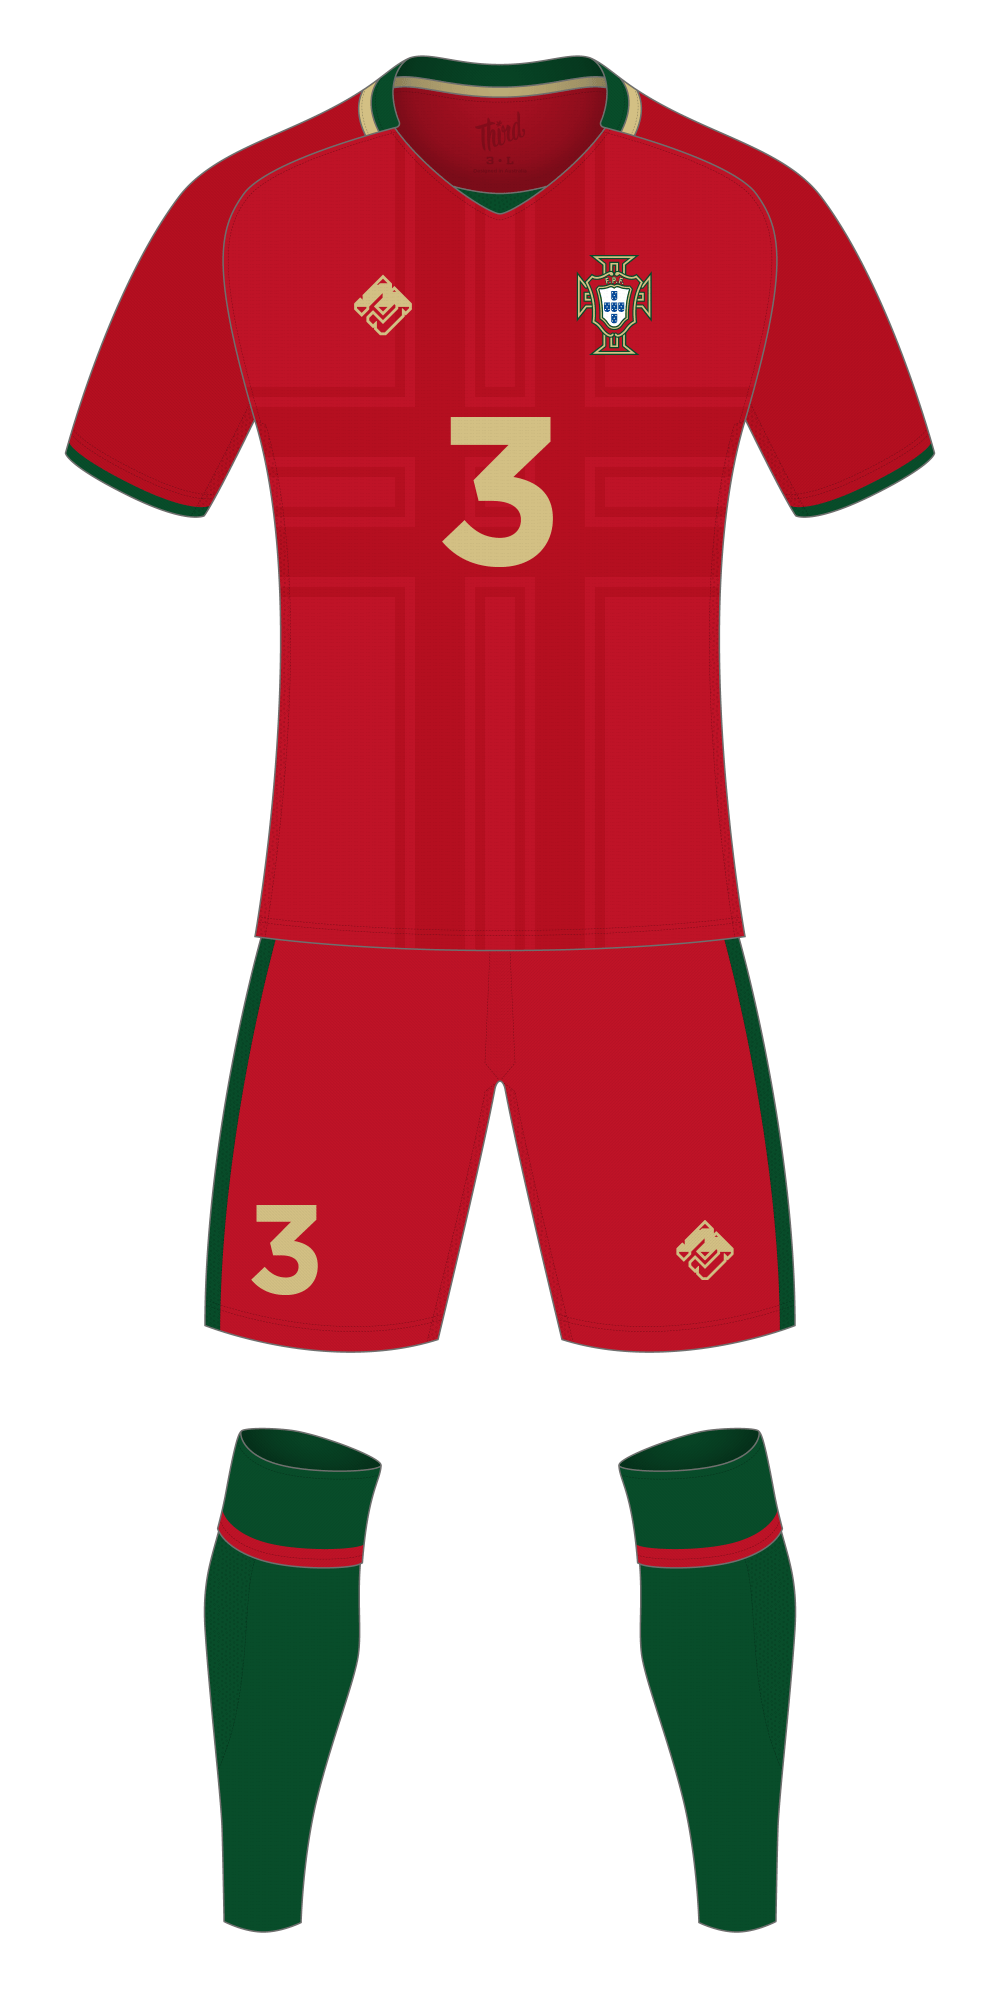 Portugal World Cup 2018 concept